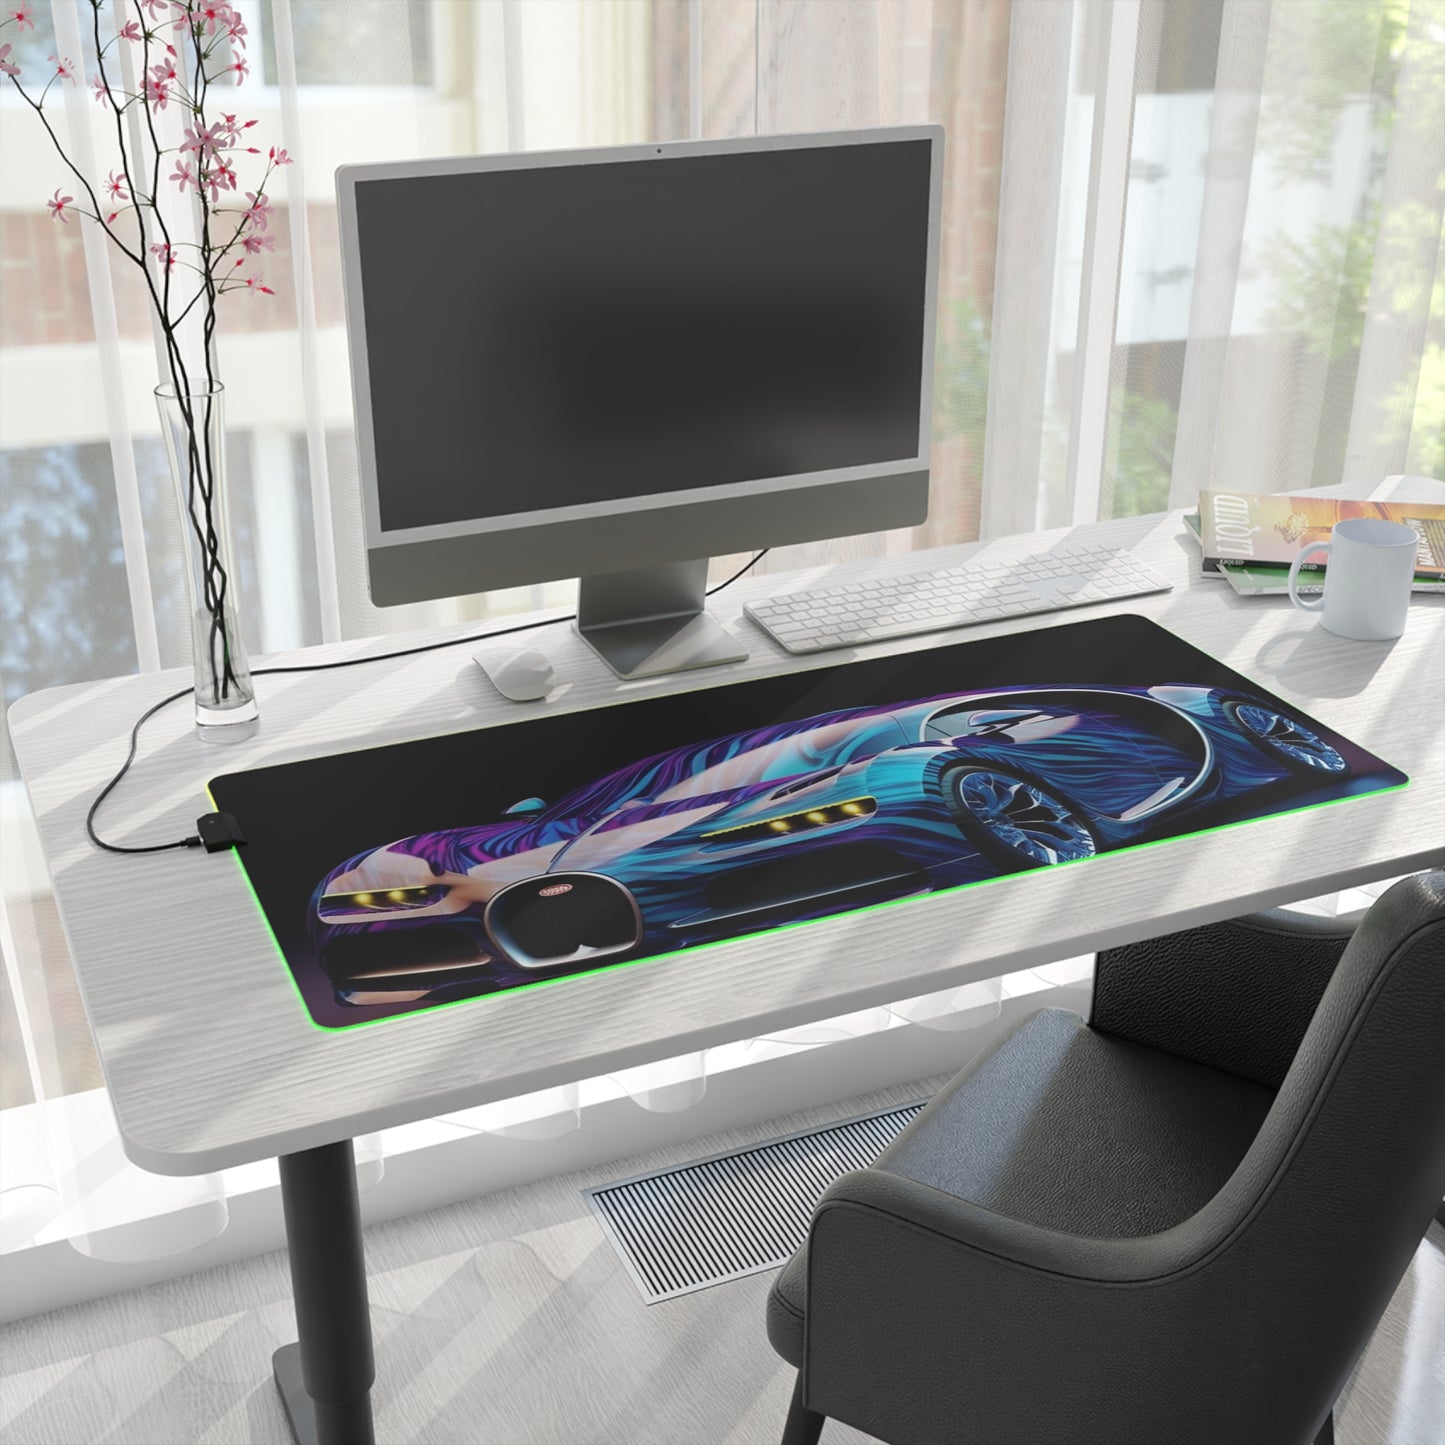 LED Gaming Mouse Pad Bugatti Abstract Flair 3